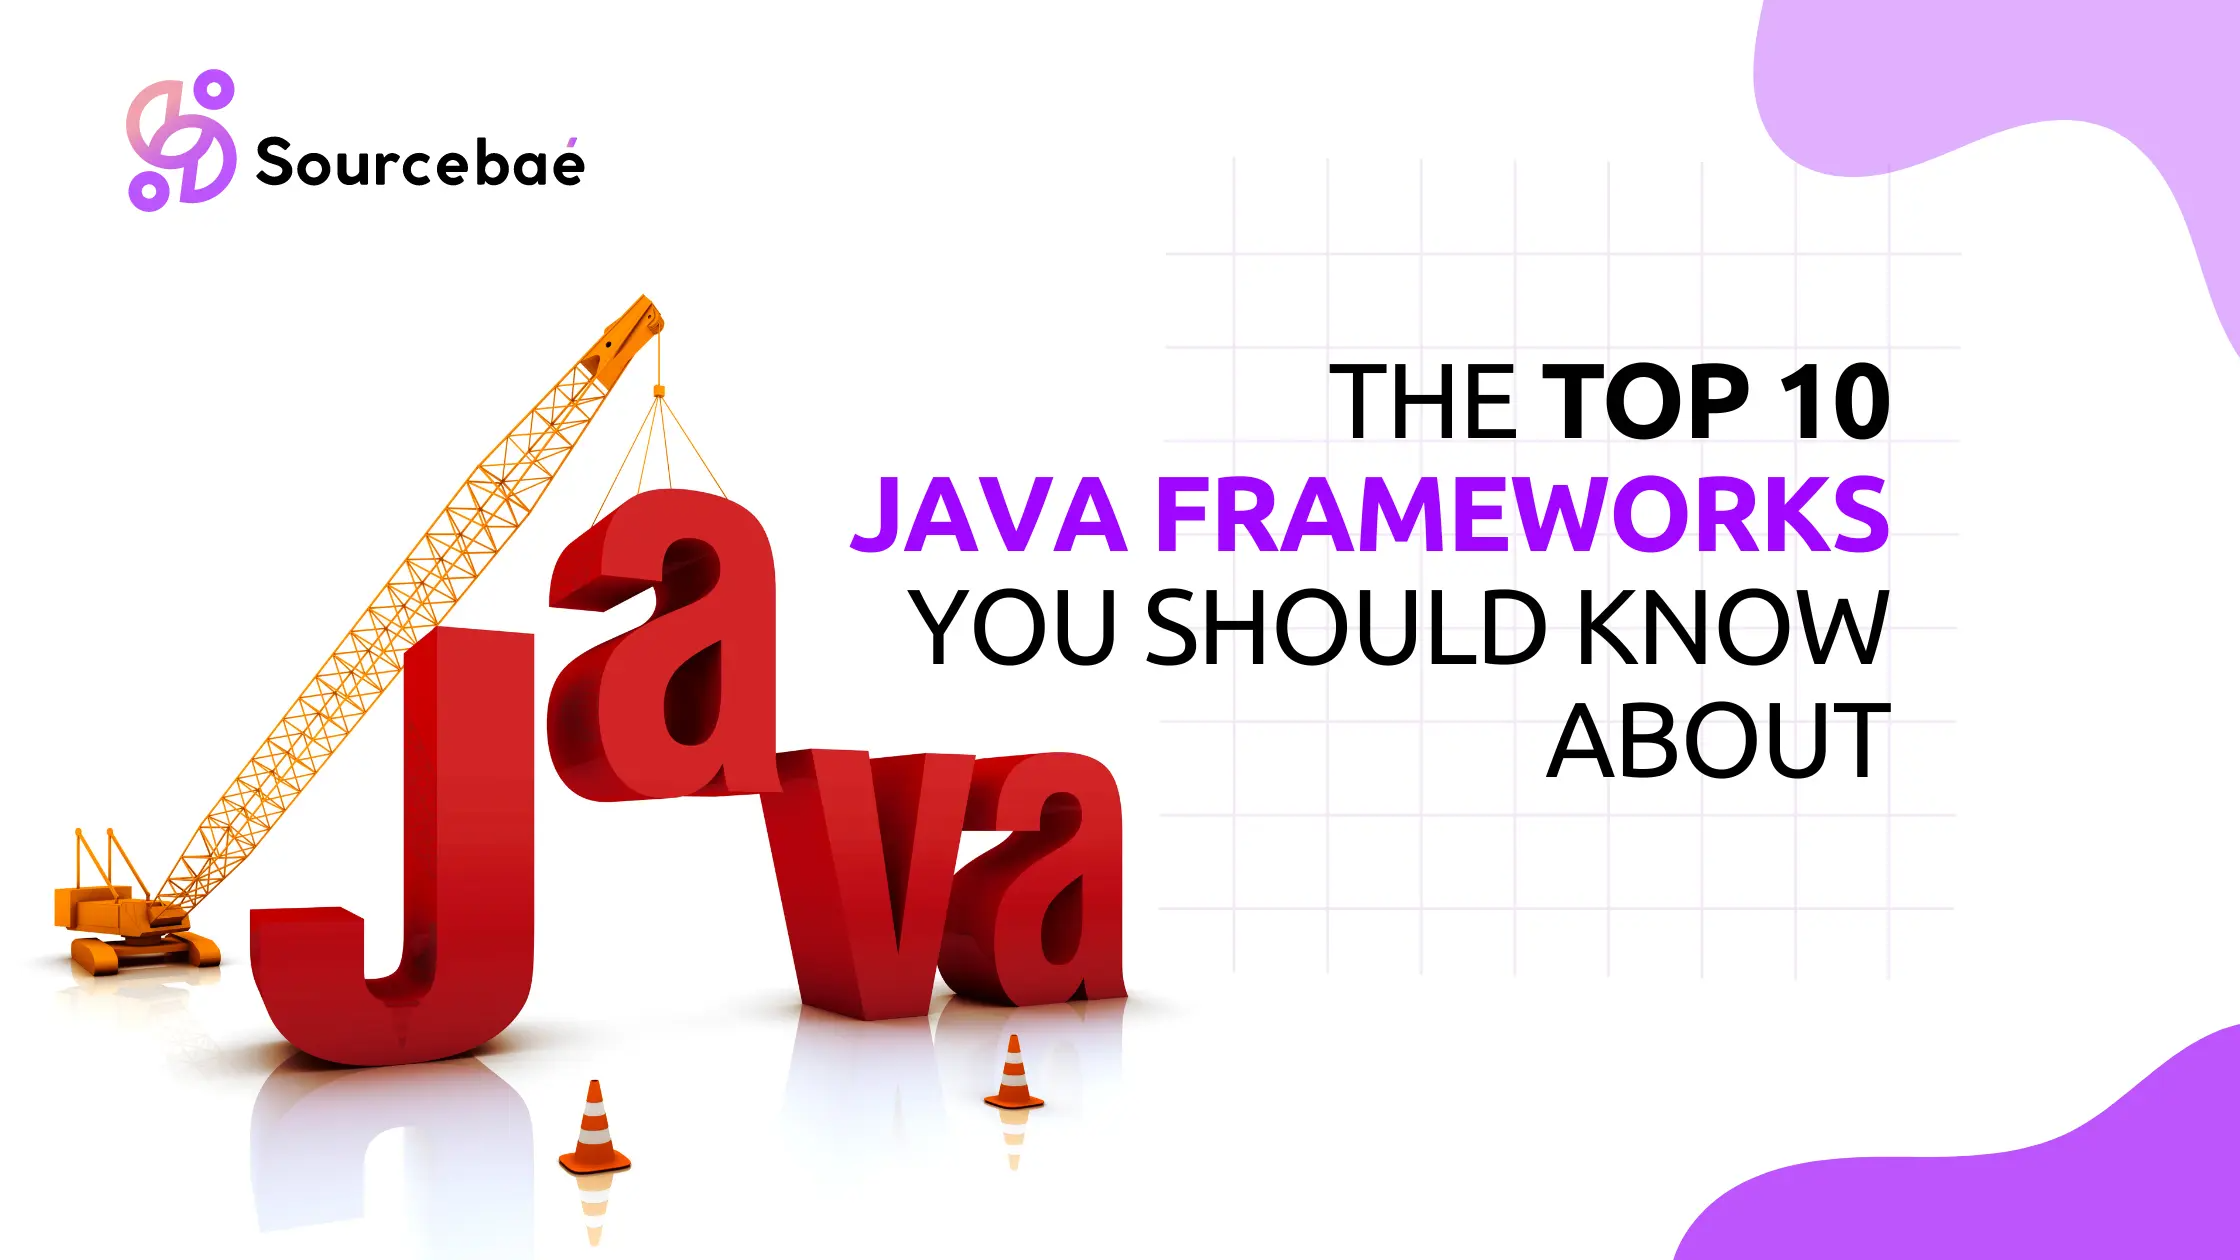 The Top 10 Java Frameworks You Should Know About